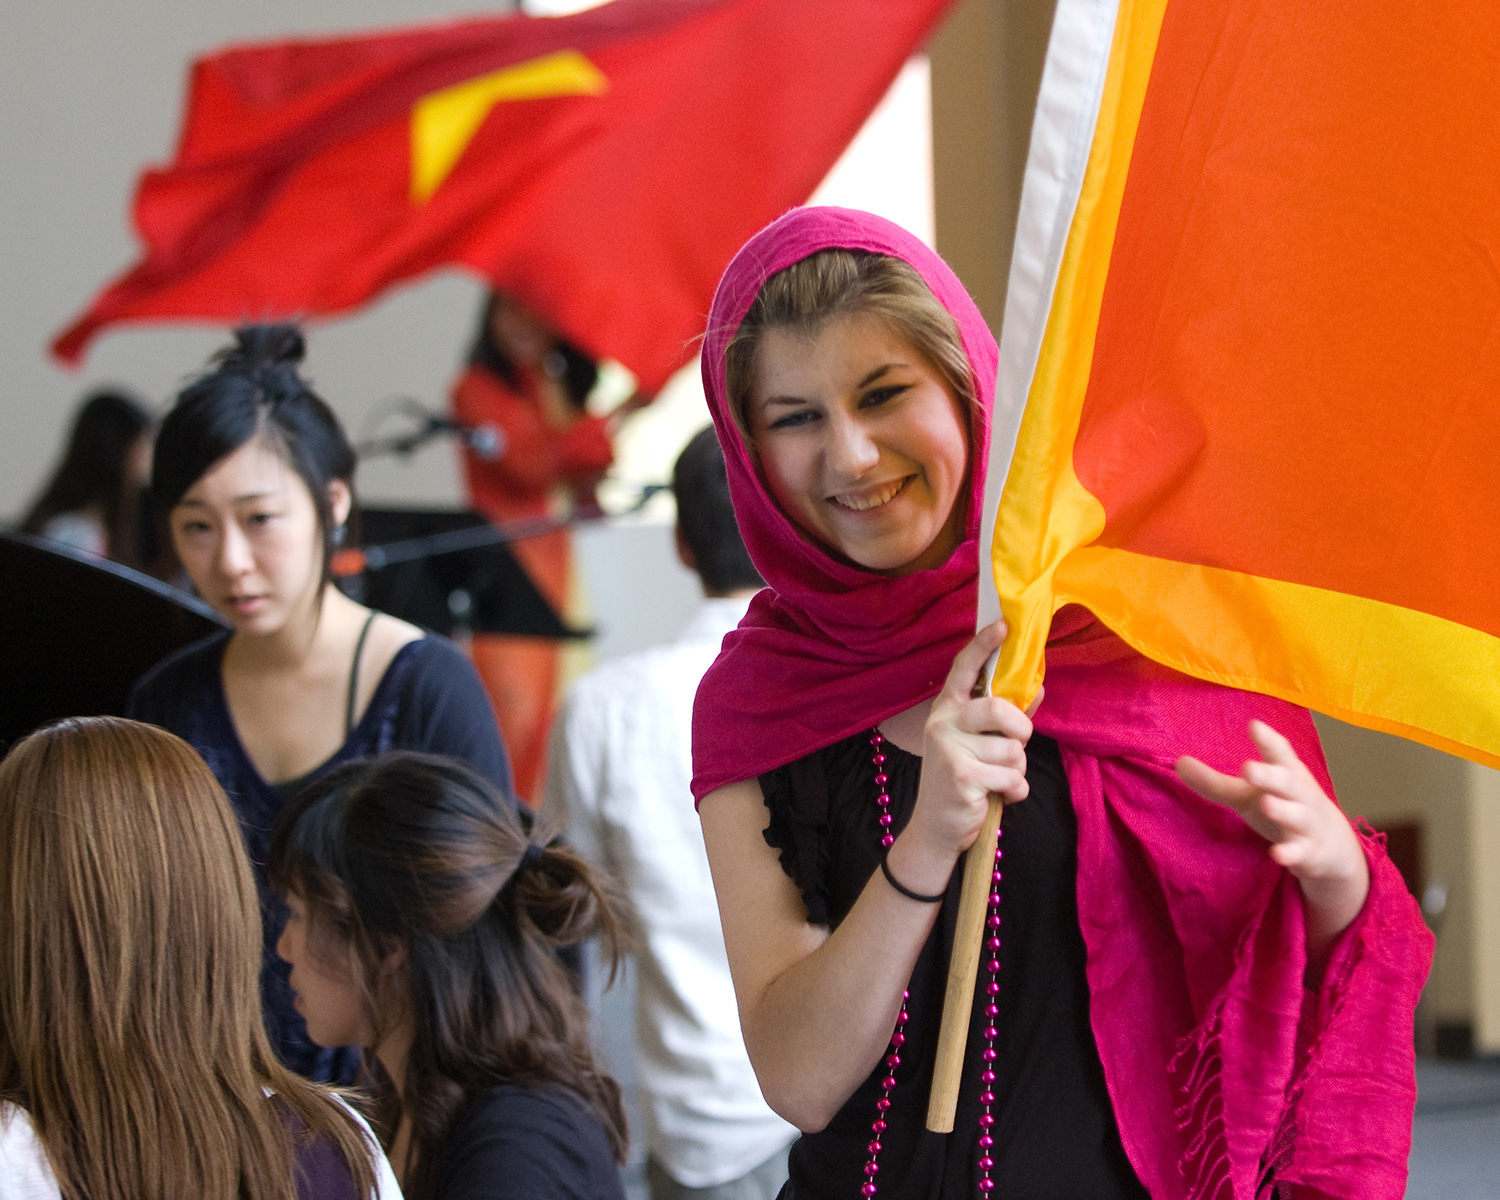 Female in pink hood holding flag while other international flag is displayed in background